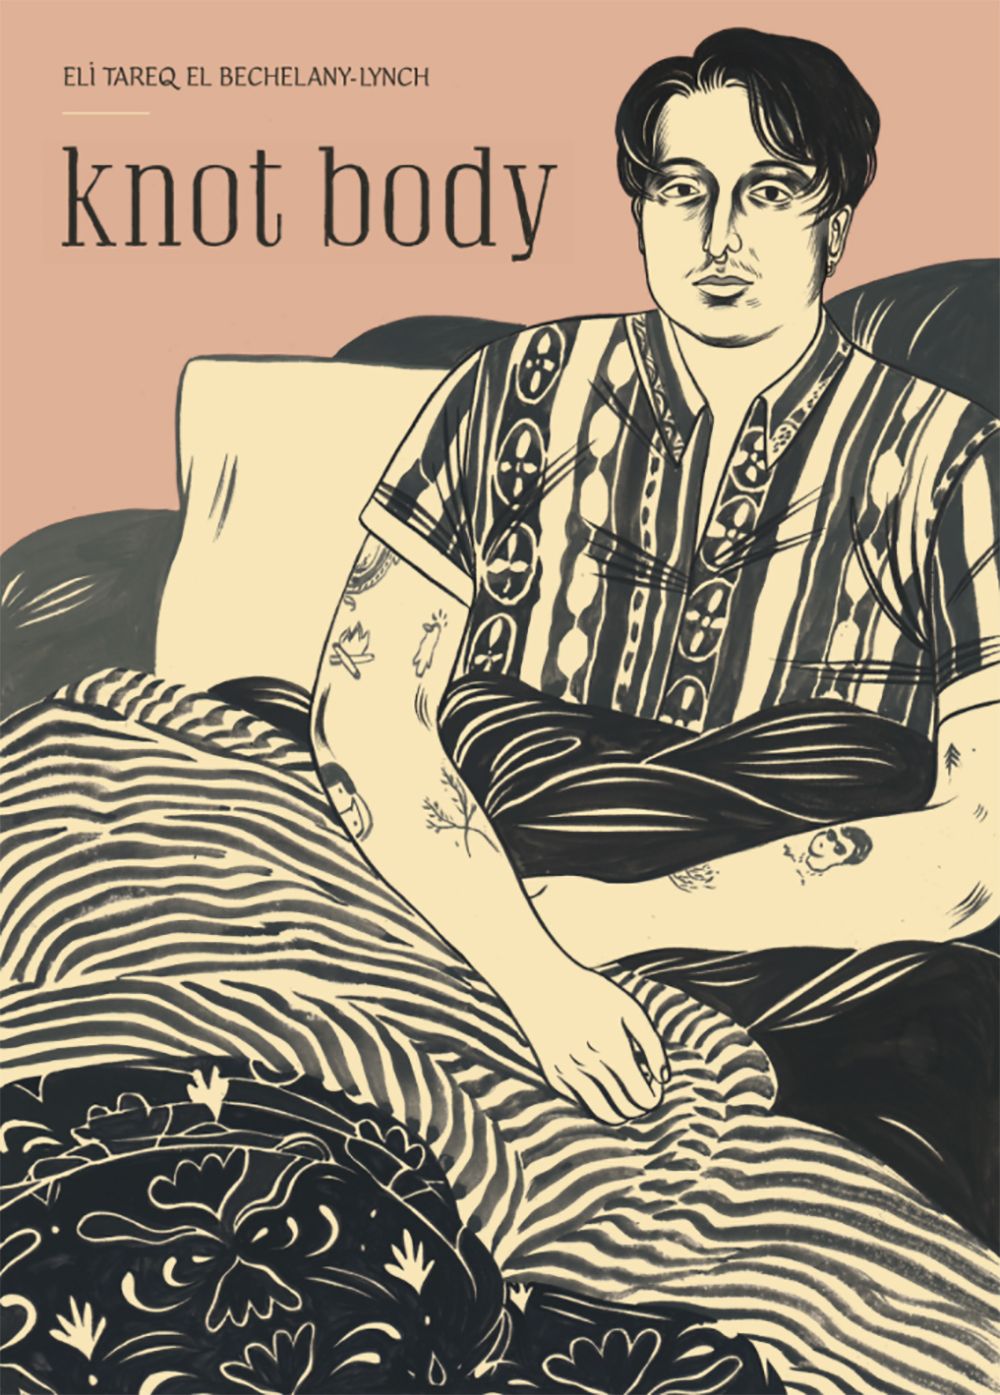 Cover of Knot Body by Eli Tareq El Bechelany-Lynch